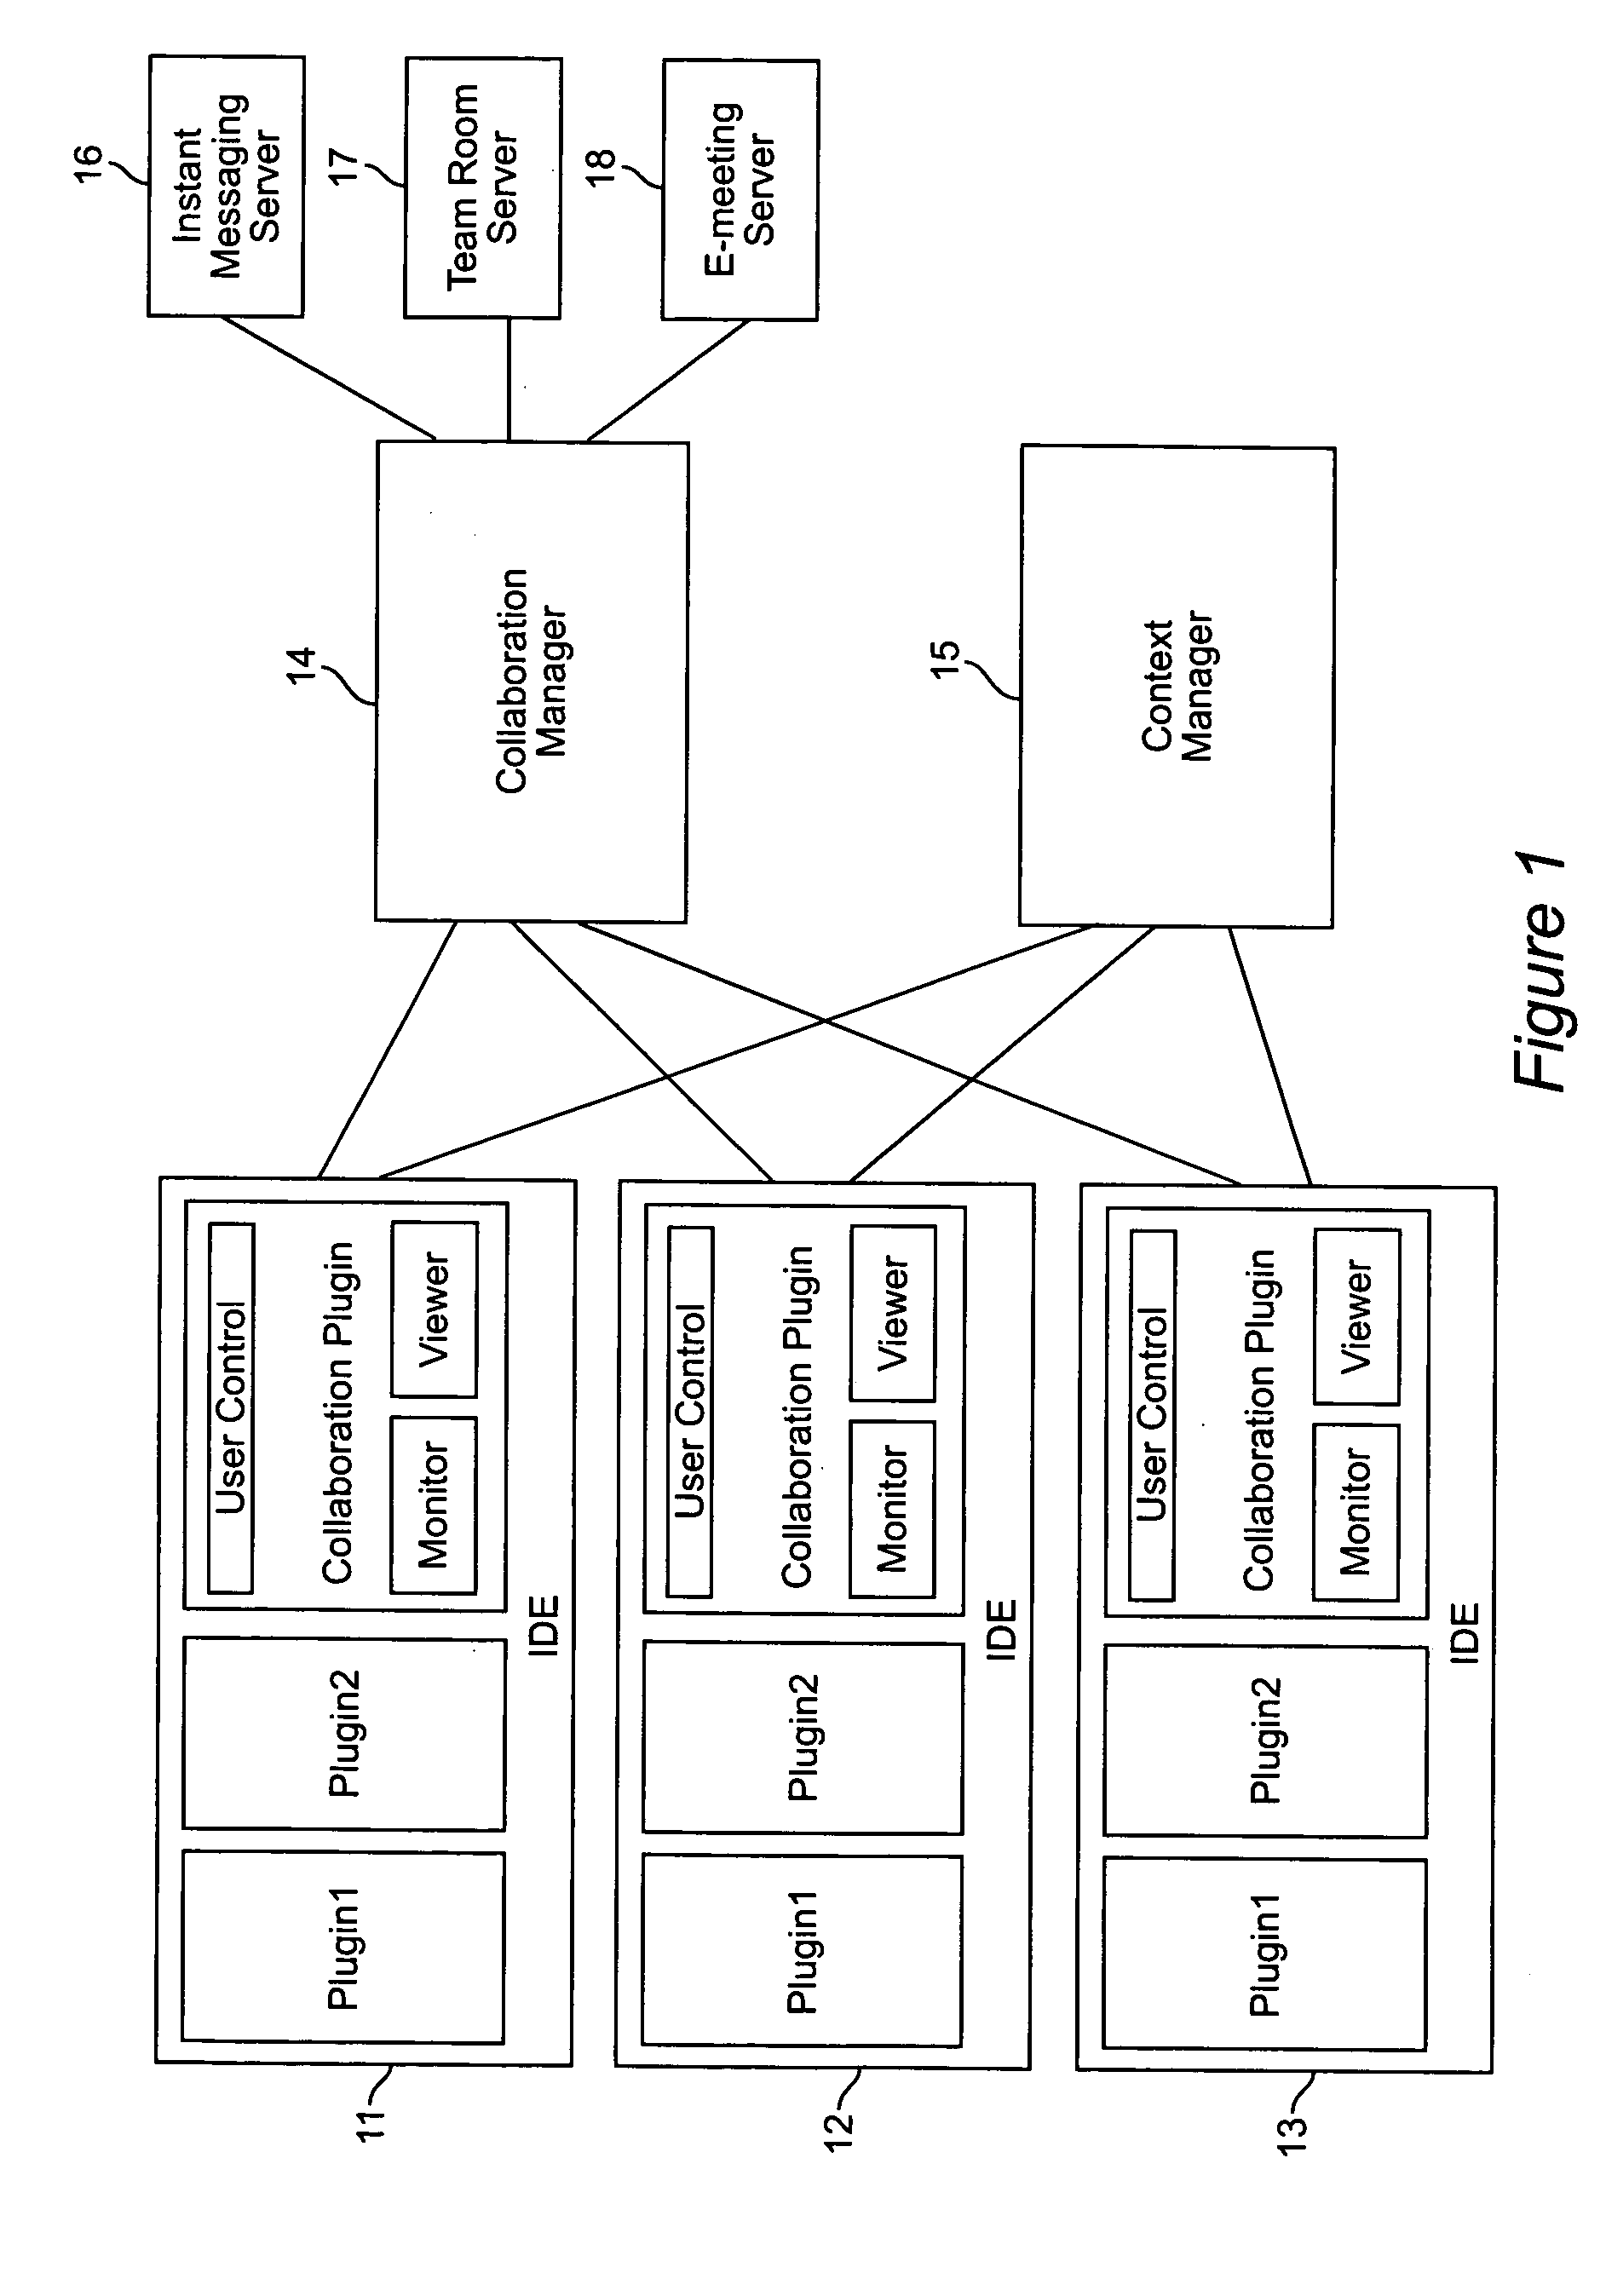 System and method for collaborative development environments